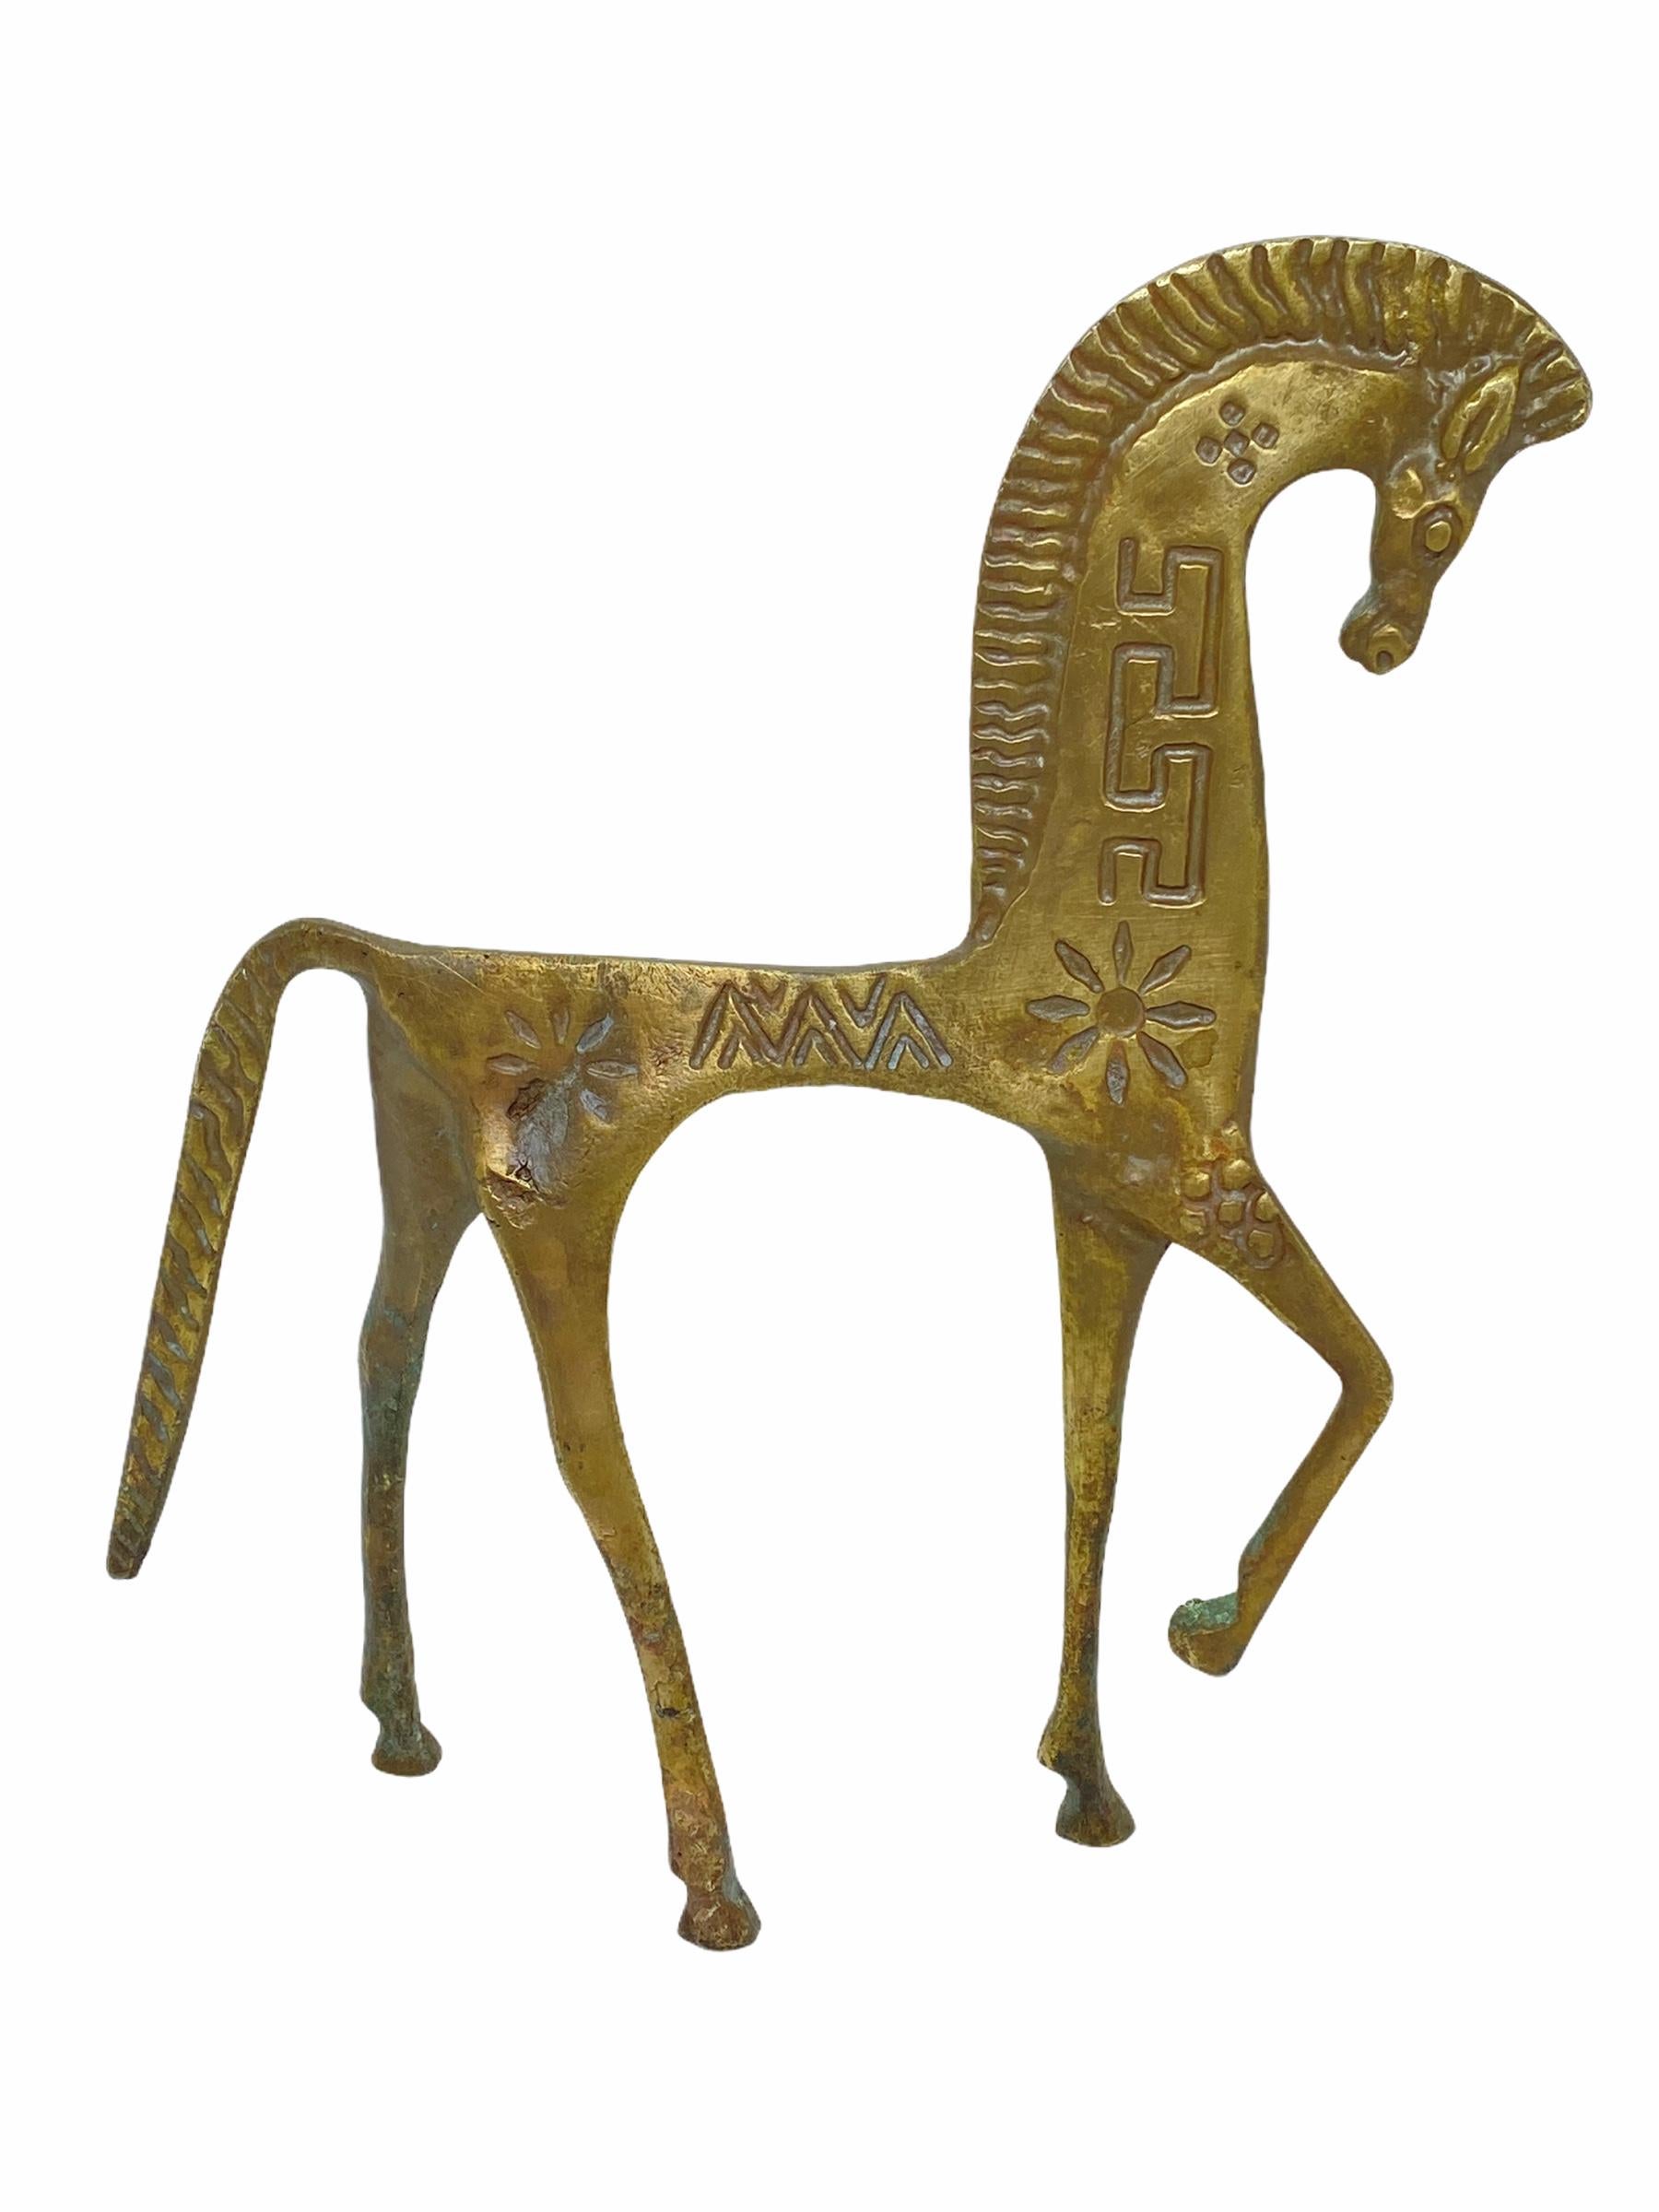 Offered is a Mid-Century Modern Pepe Mendoza style Etruscan patinated carved brass horse sculptures. This Etruscan brass horses is an iconic Mid-Century Modern item of decor with carved Mid-Century Modern details. It would look fabulous on a console